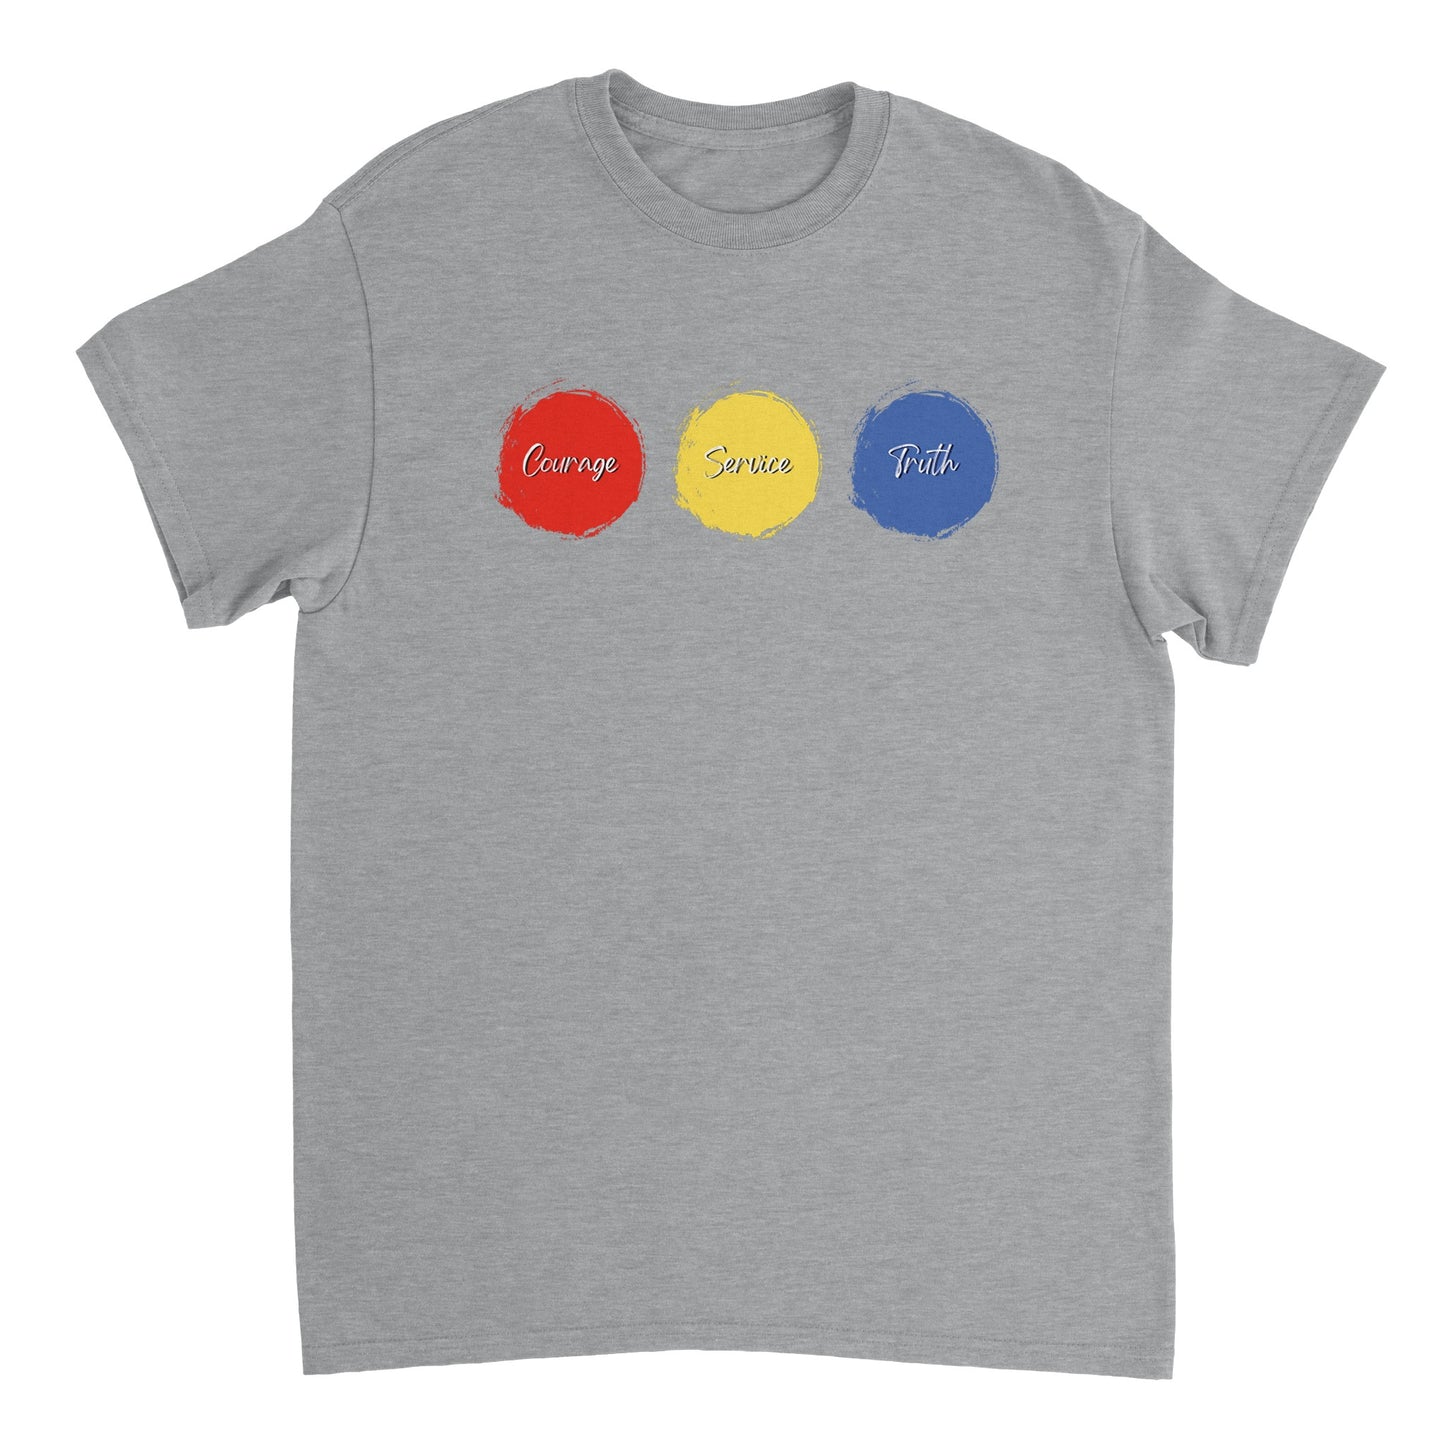 Primary Colors Tee